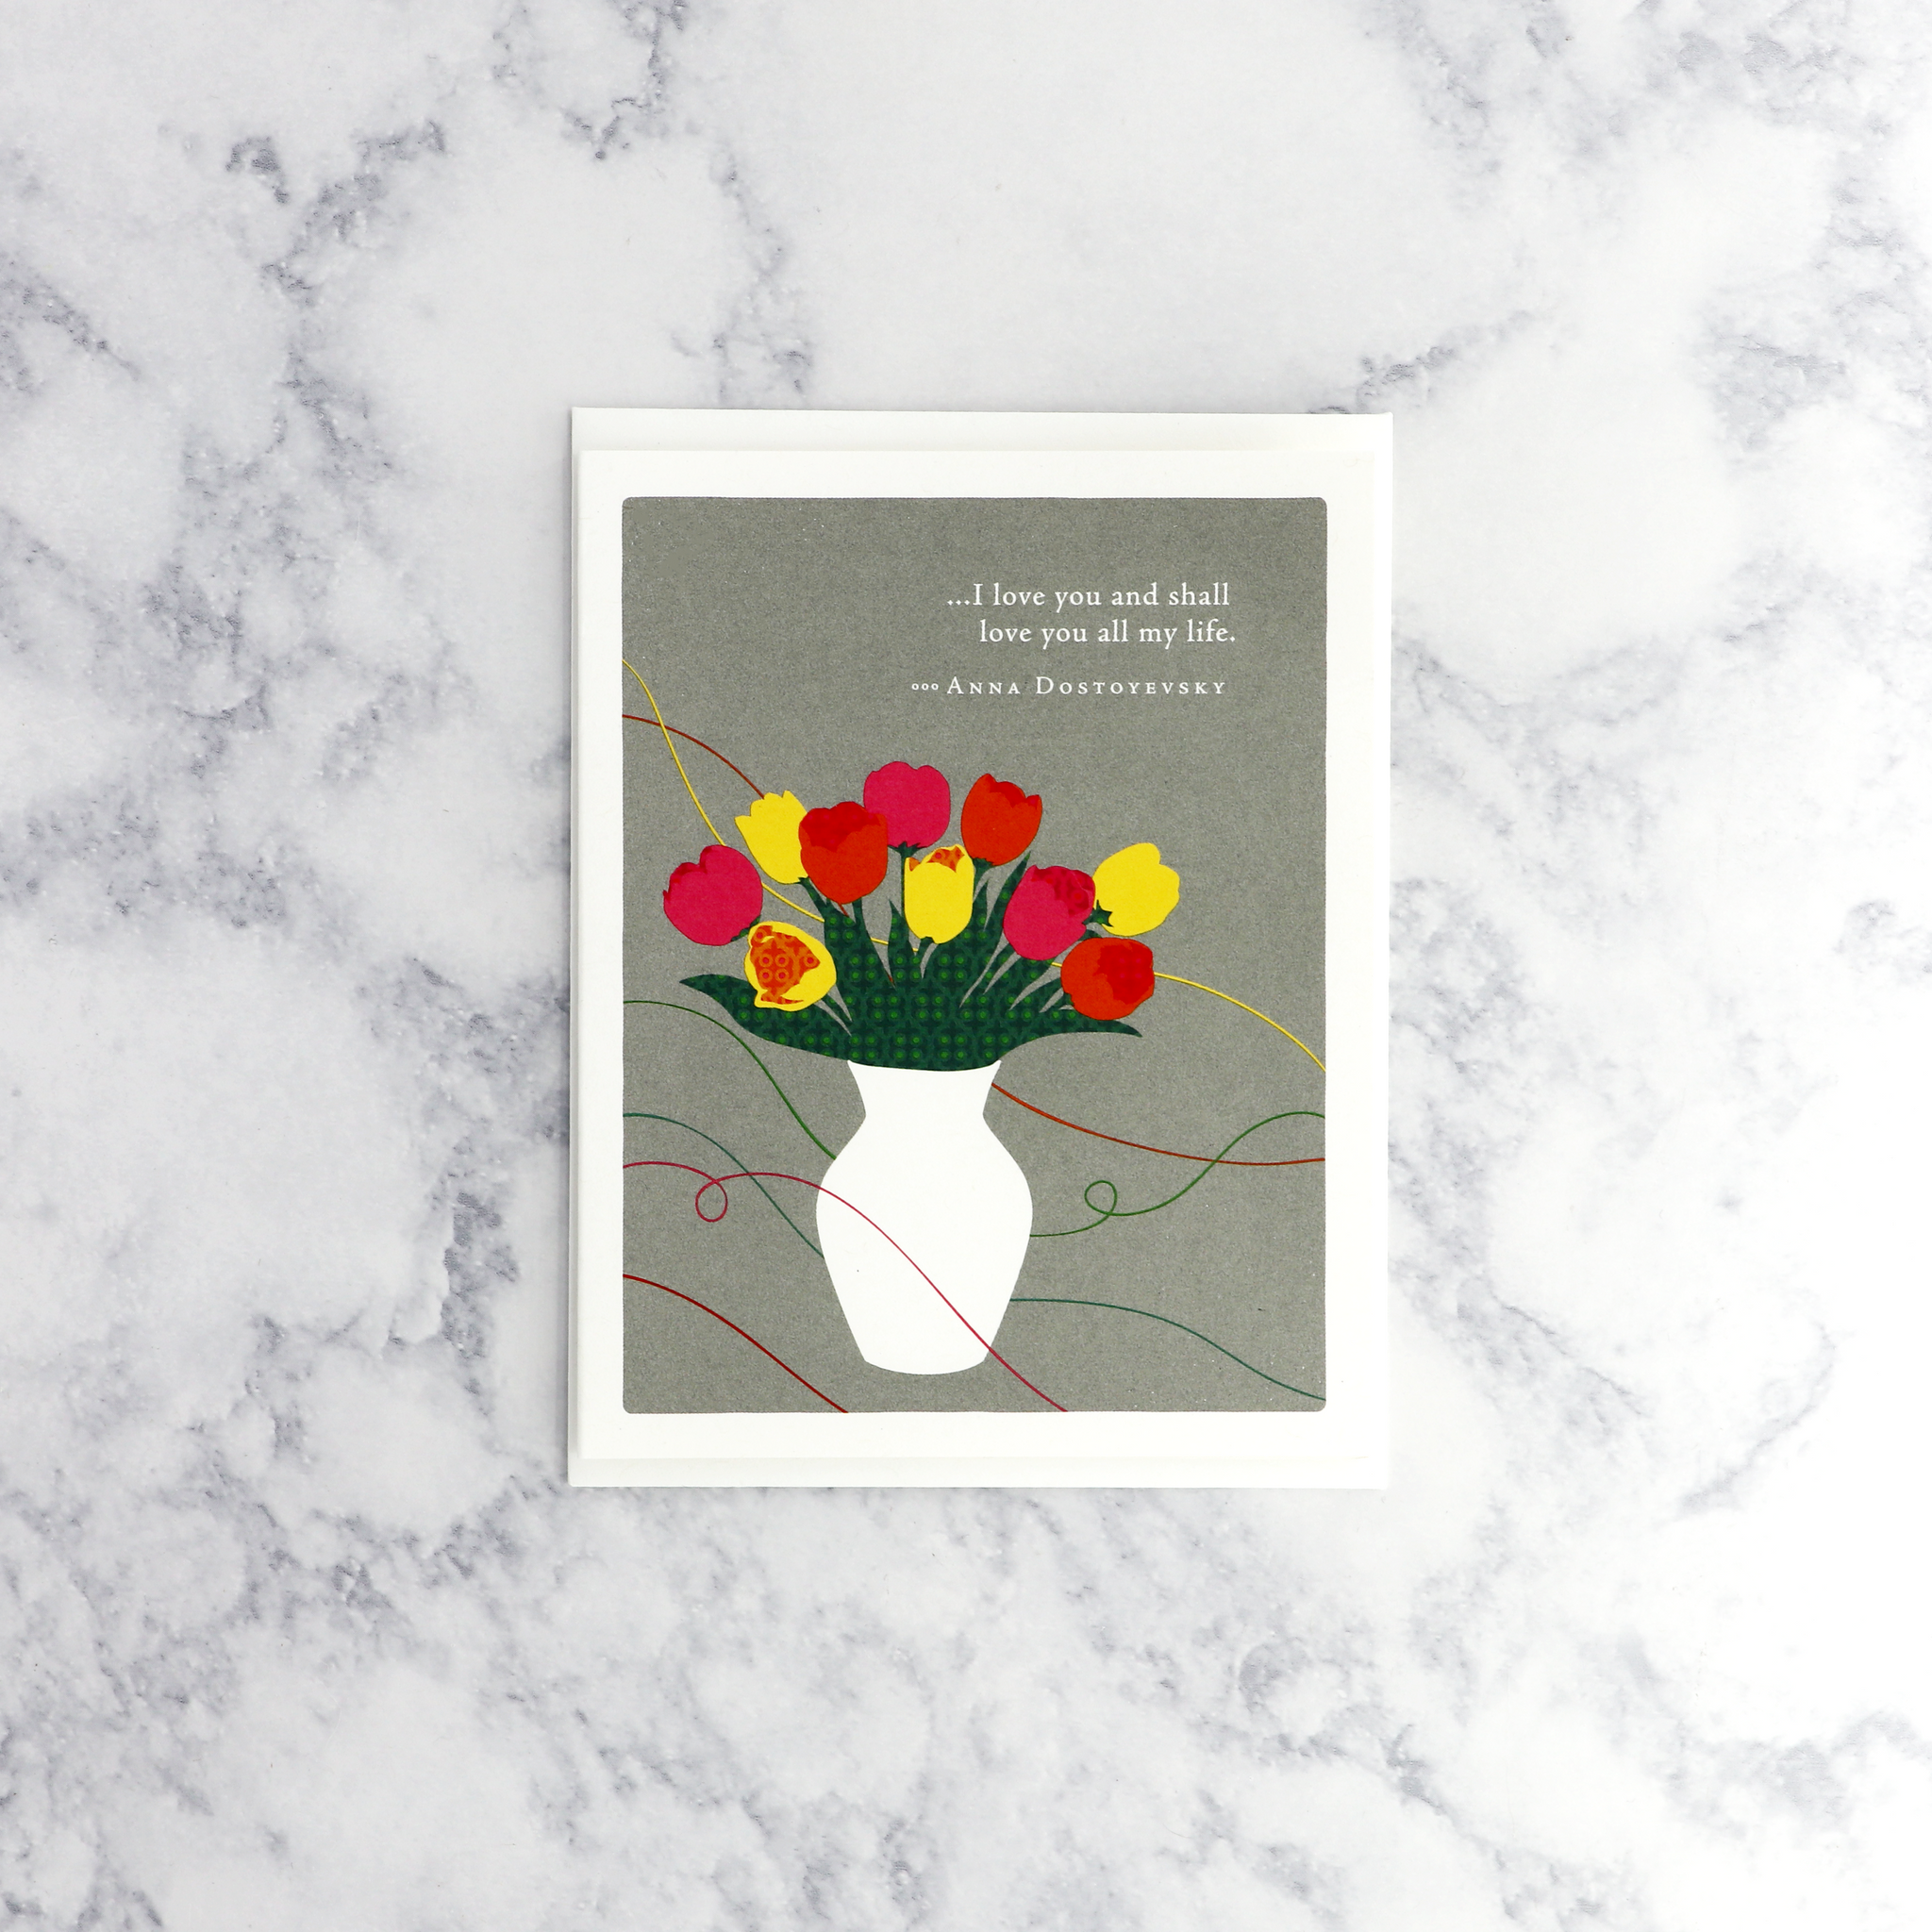 Floral Arrangement Anna Dostoyevsky Quote Mother's Day Card